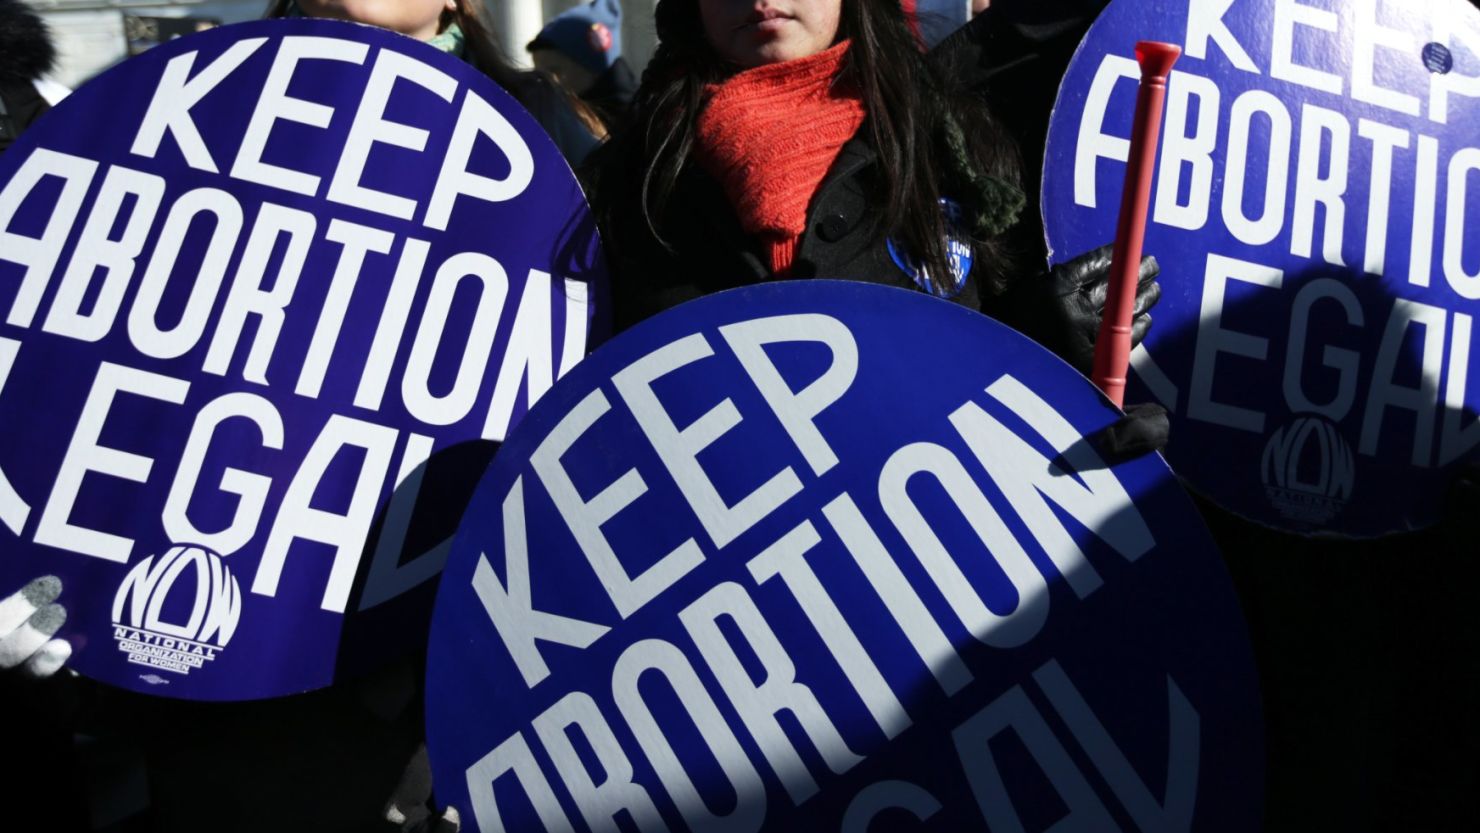 Pro-choice activists hold signs in front of the US Supreme Court January 22, 2014, on Capitol Hill in Washington, DC.